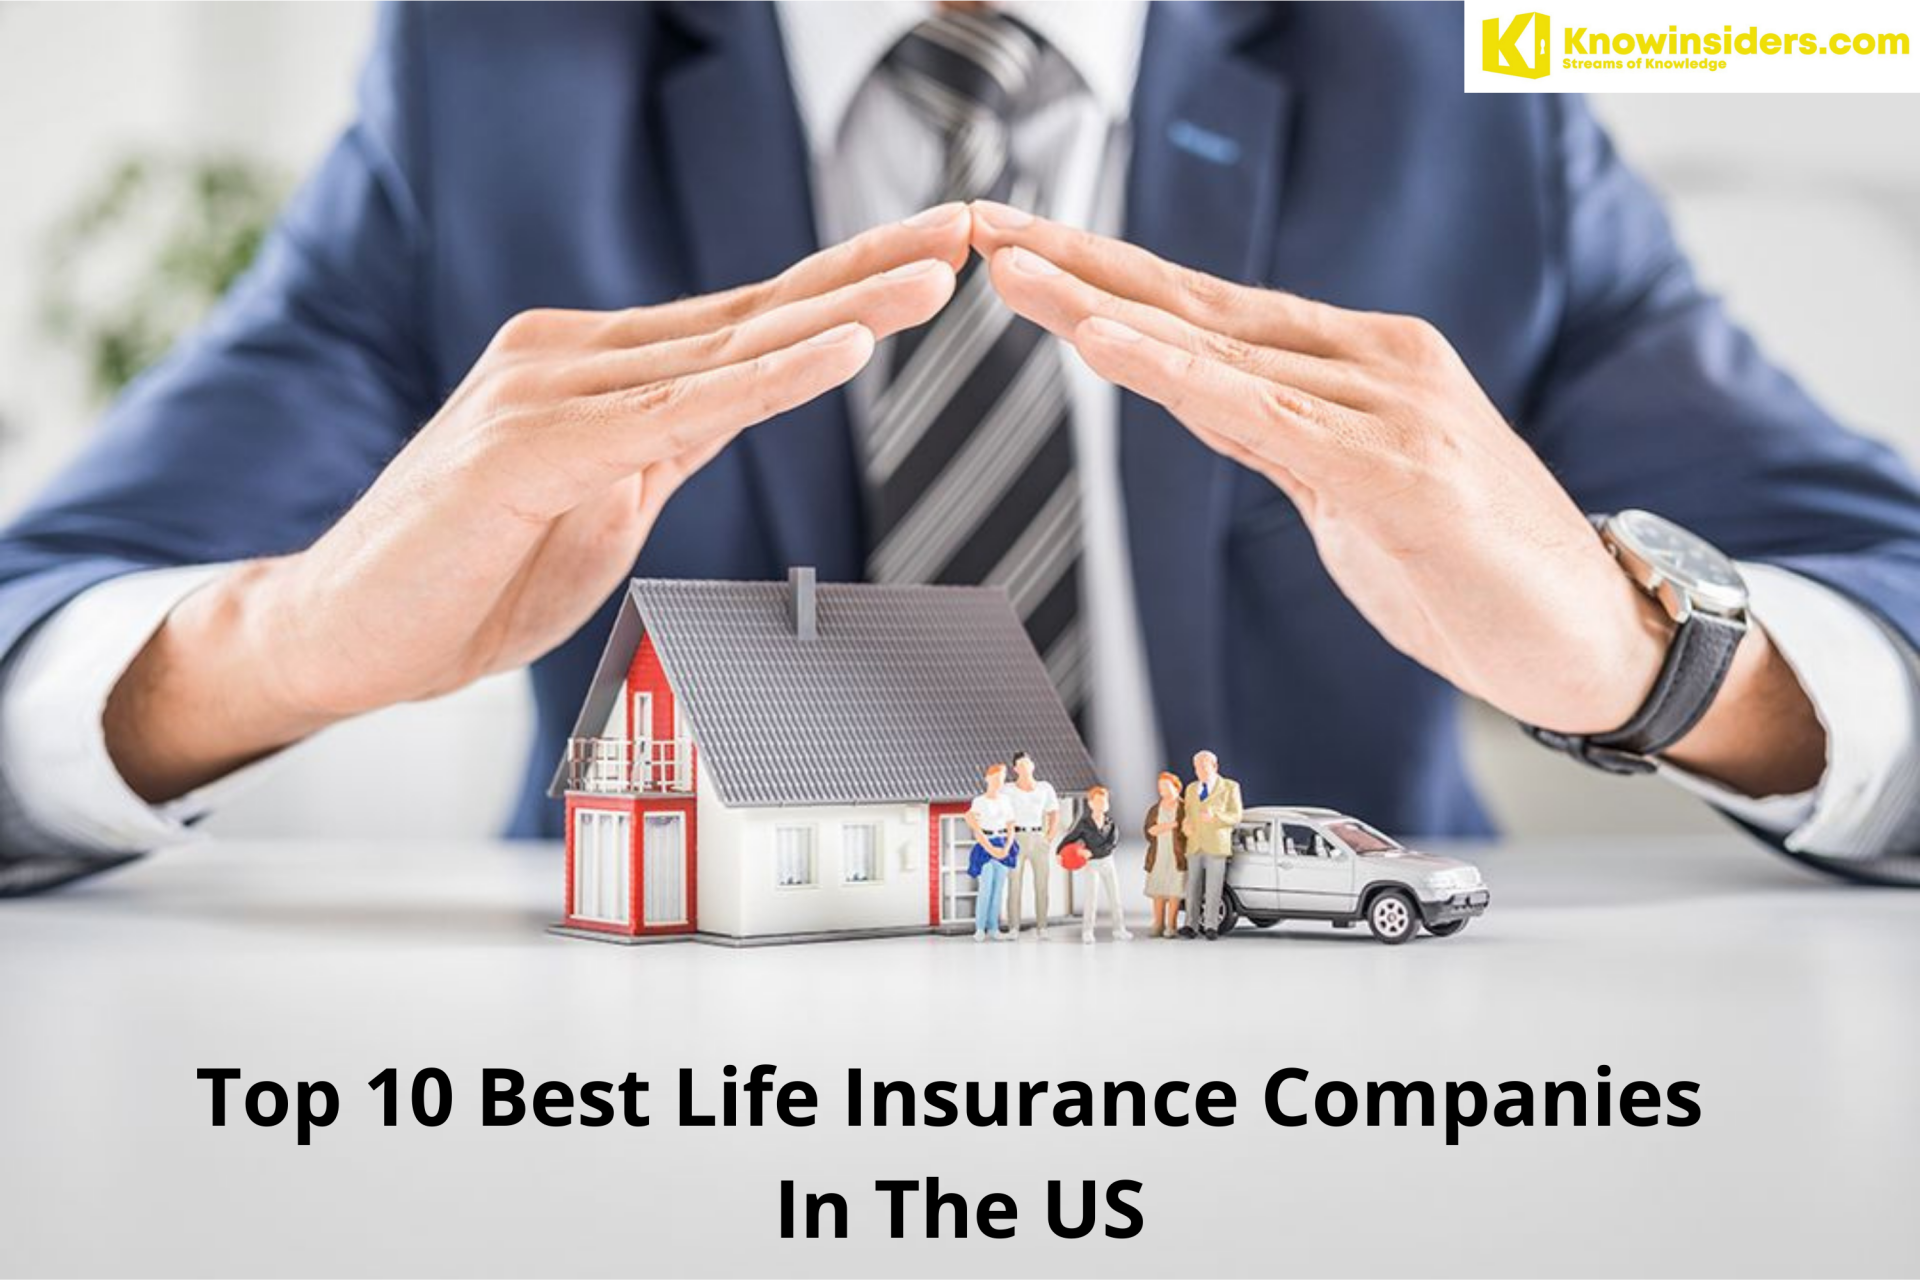 Top 10 Best Life Insurance Companies In The US - Cheapest Quotes